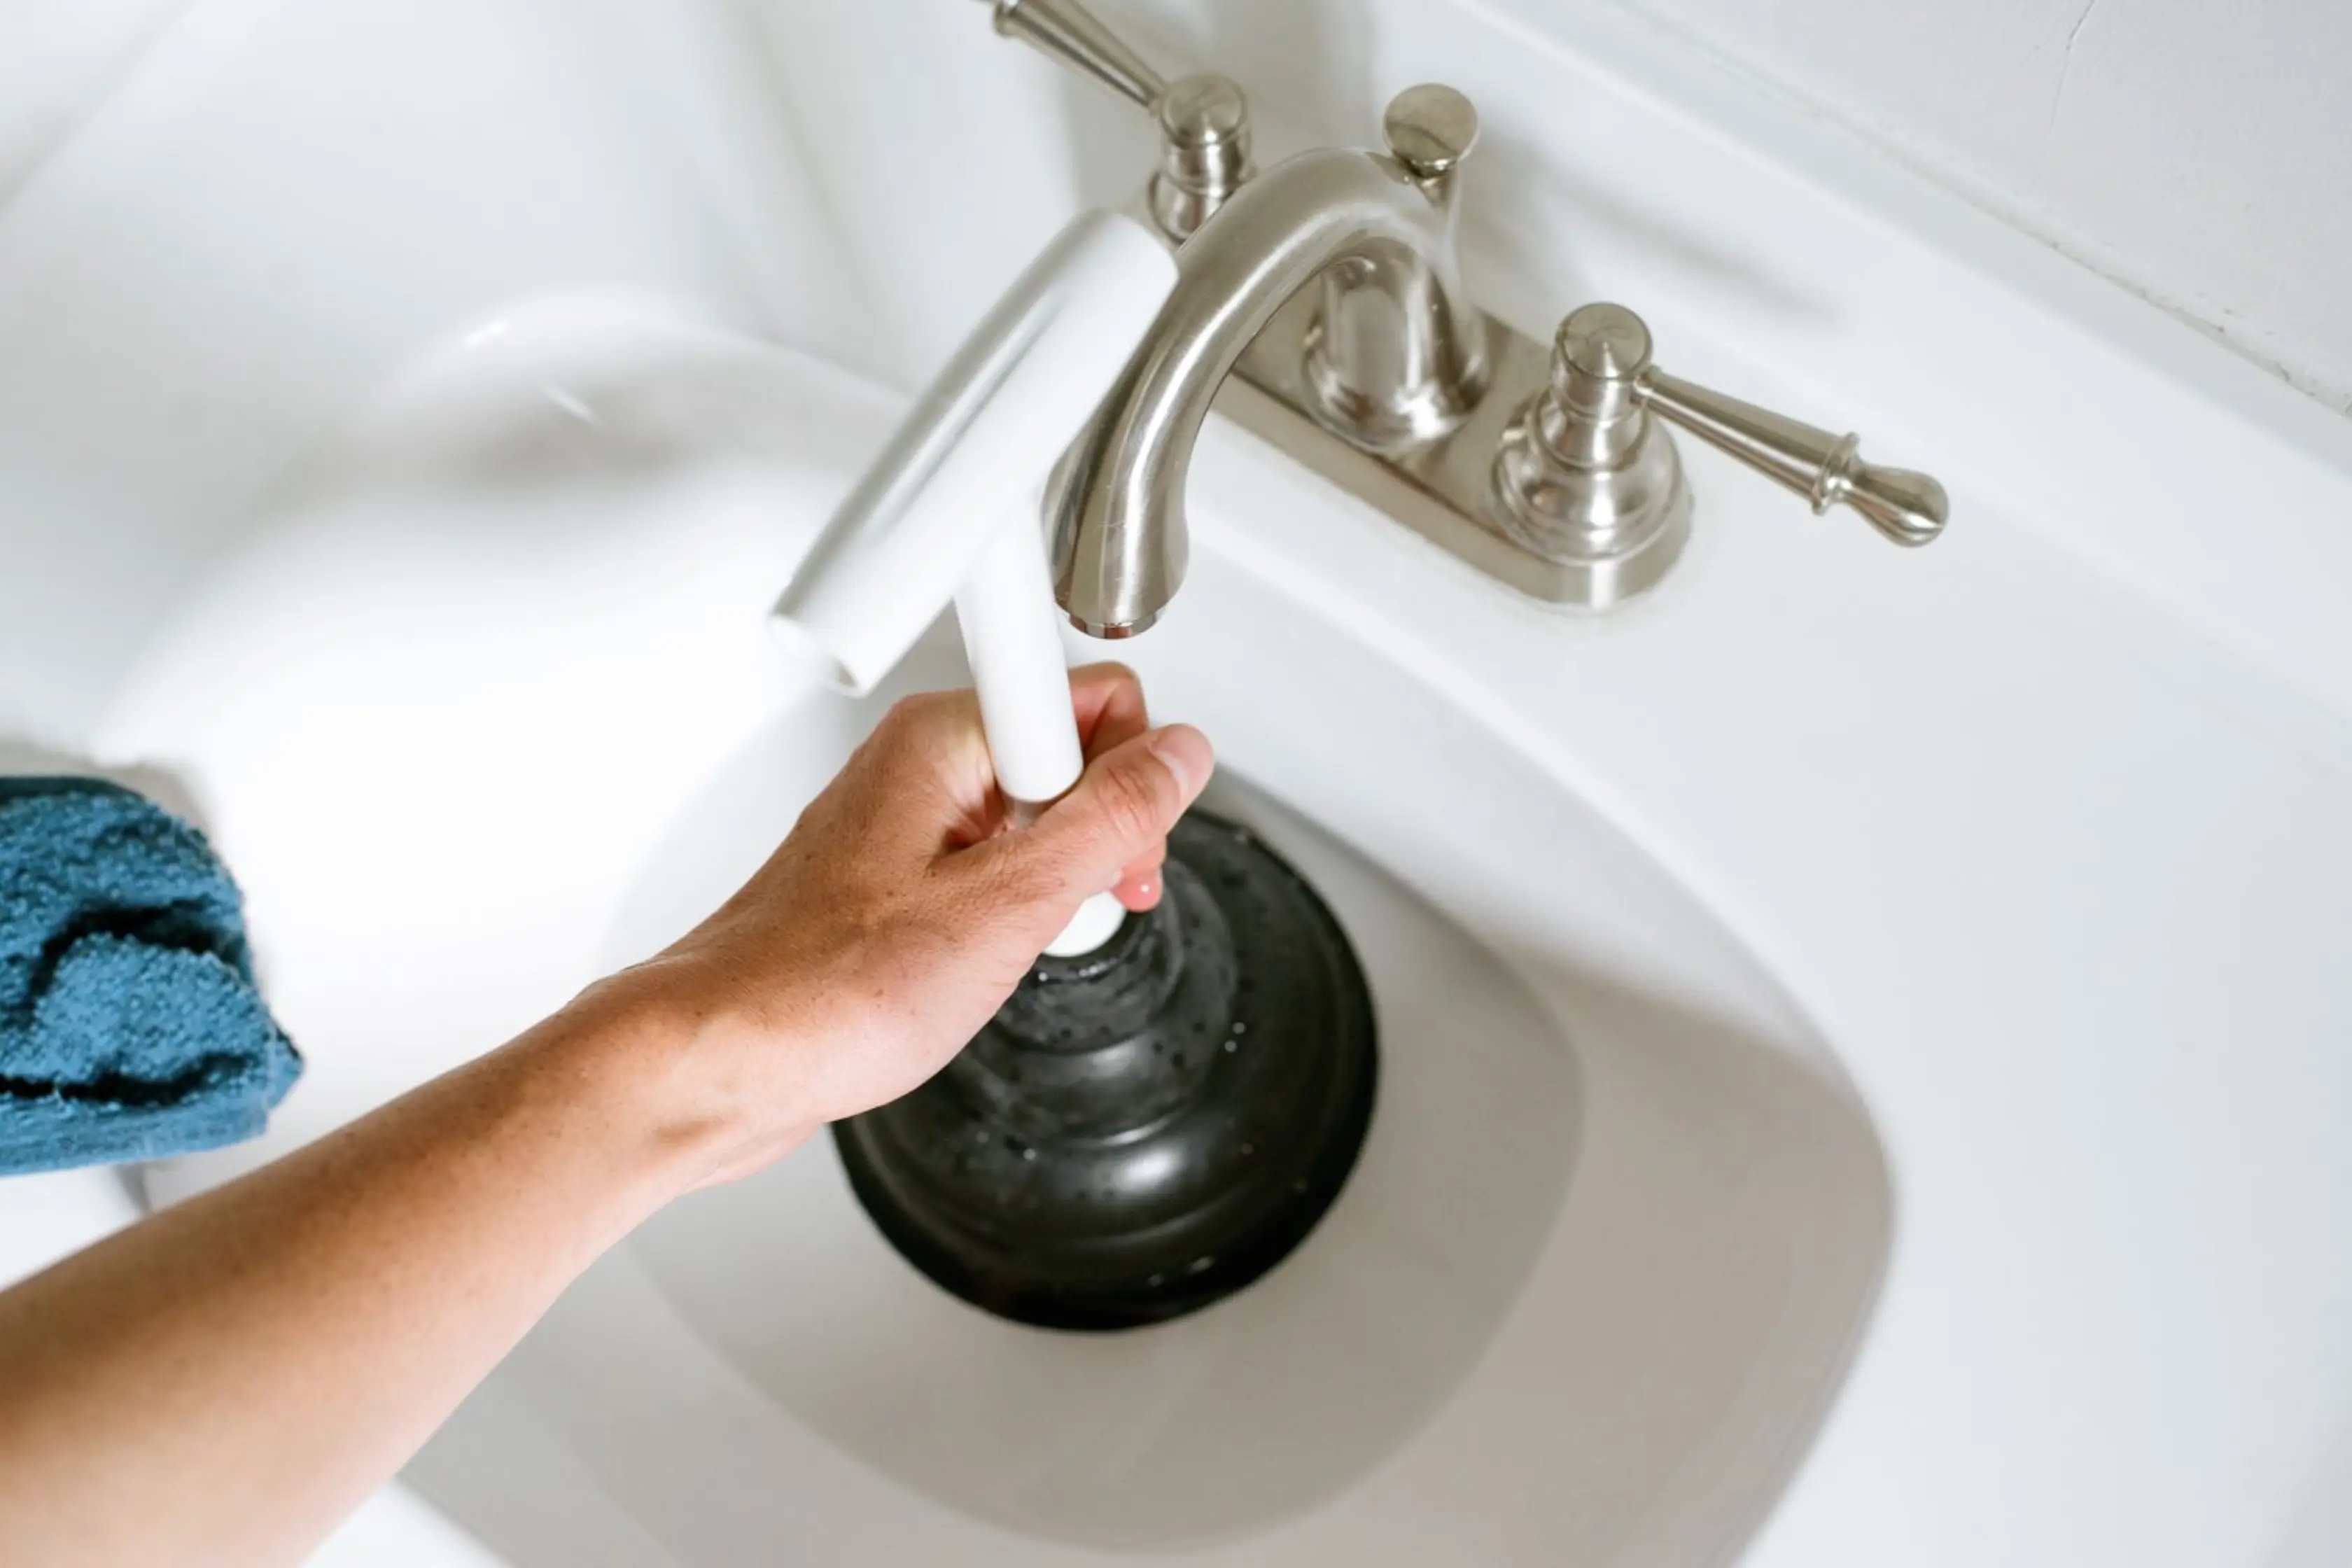 Homeowner Using Plunger To Fix Blocked Sink